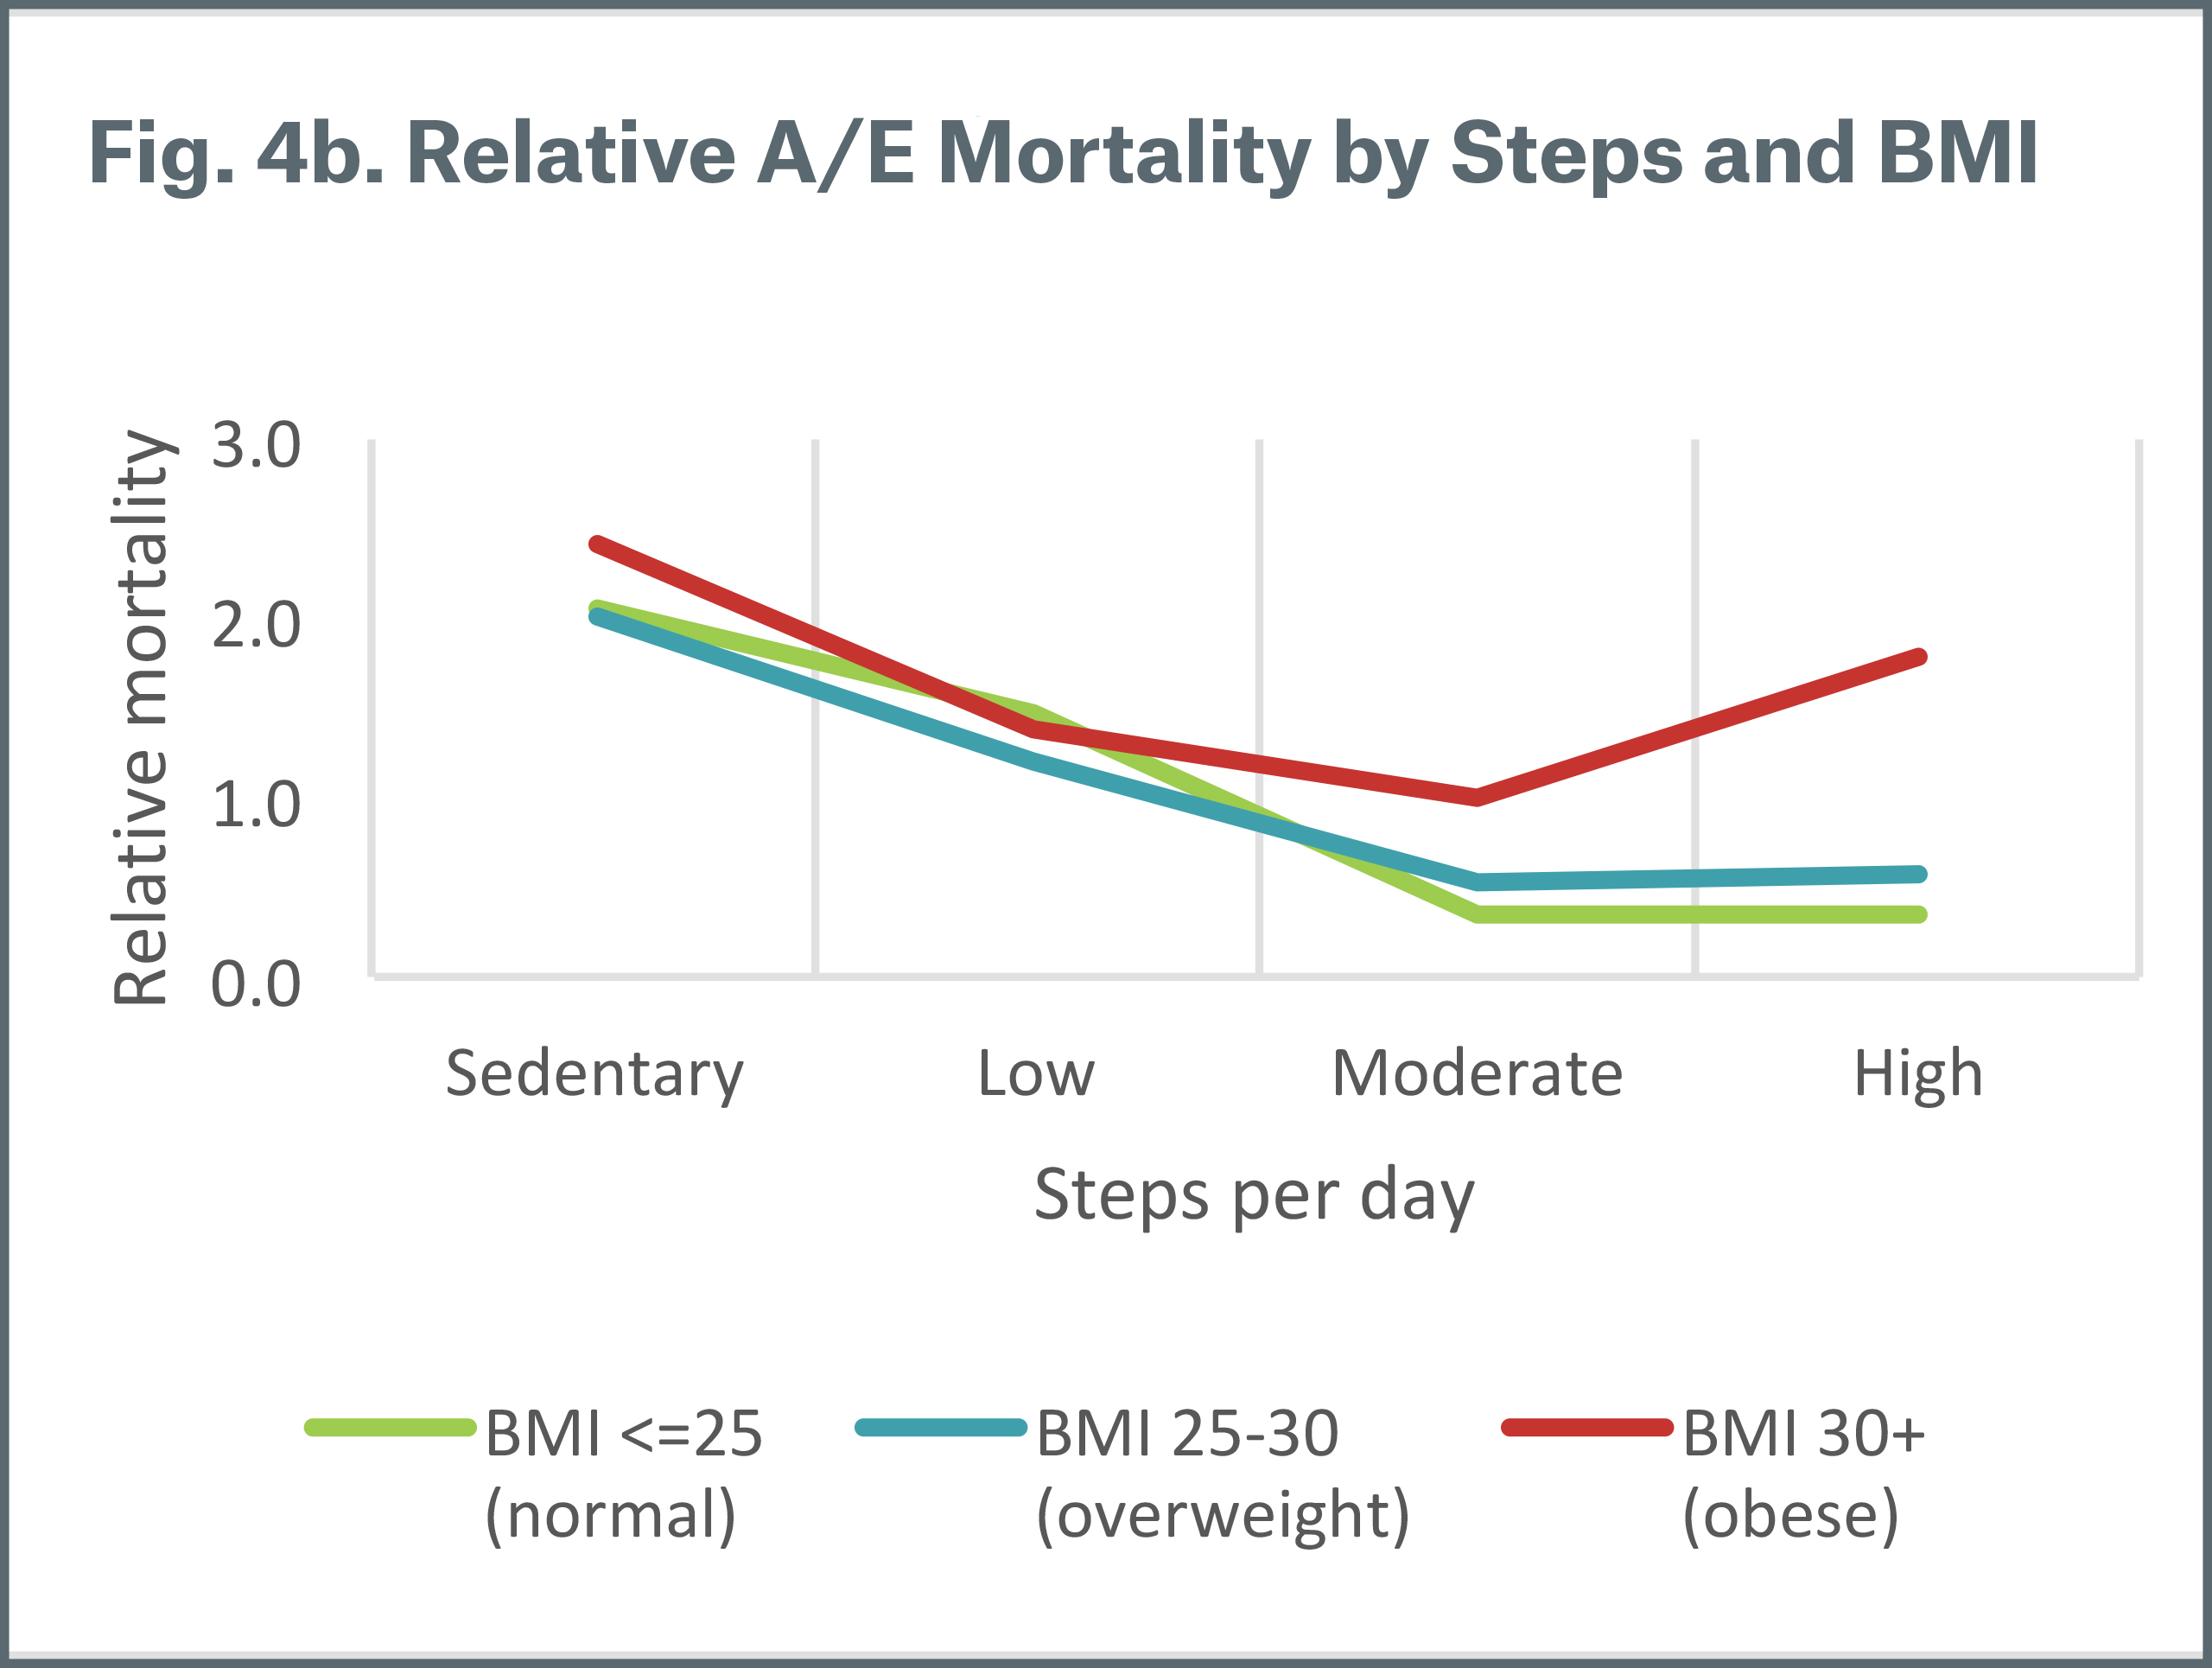 Figure 4b Relative A/E Mortality by Steps and BMI